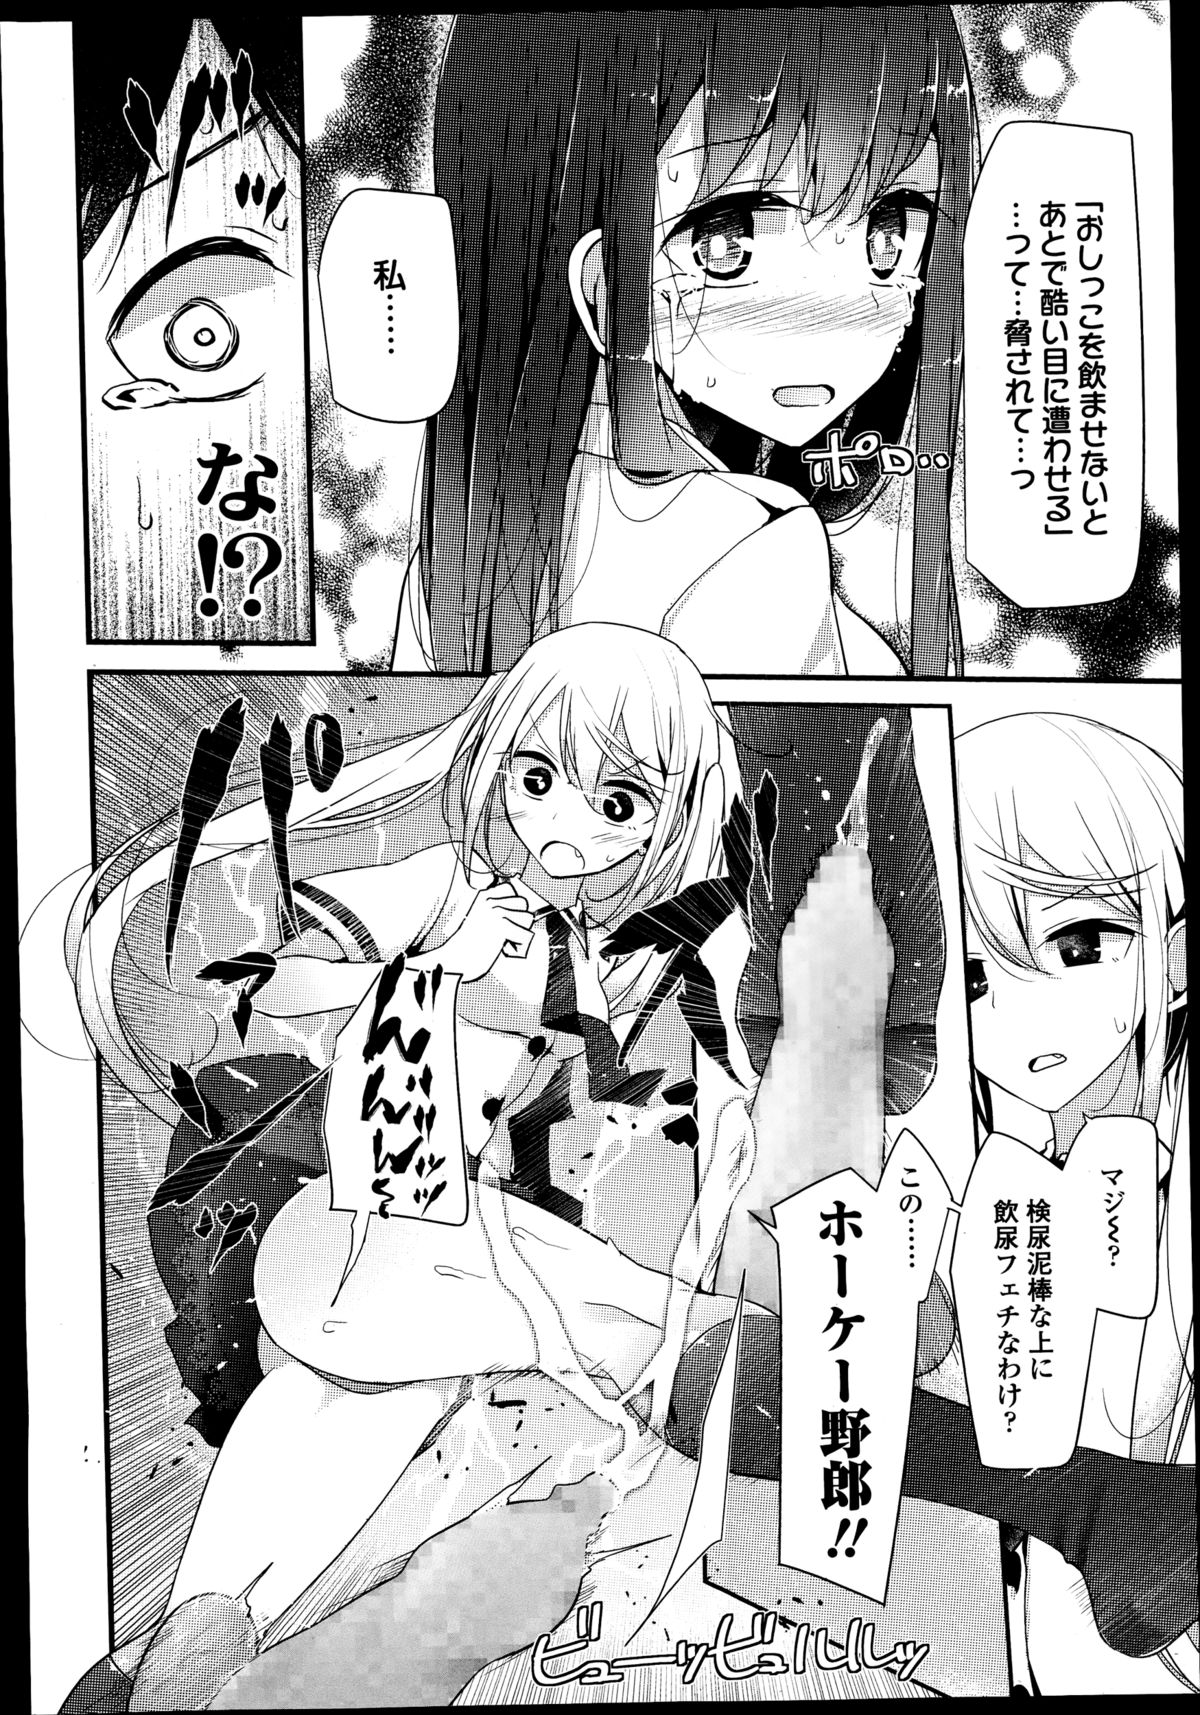 Girls forM Vol. 08 page 34 full